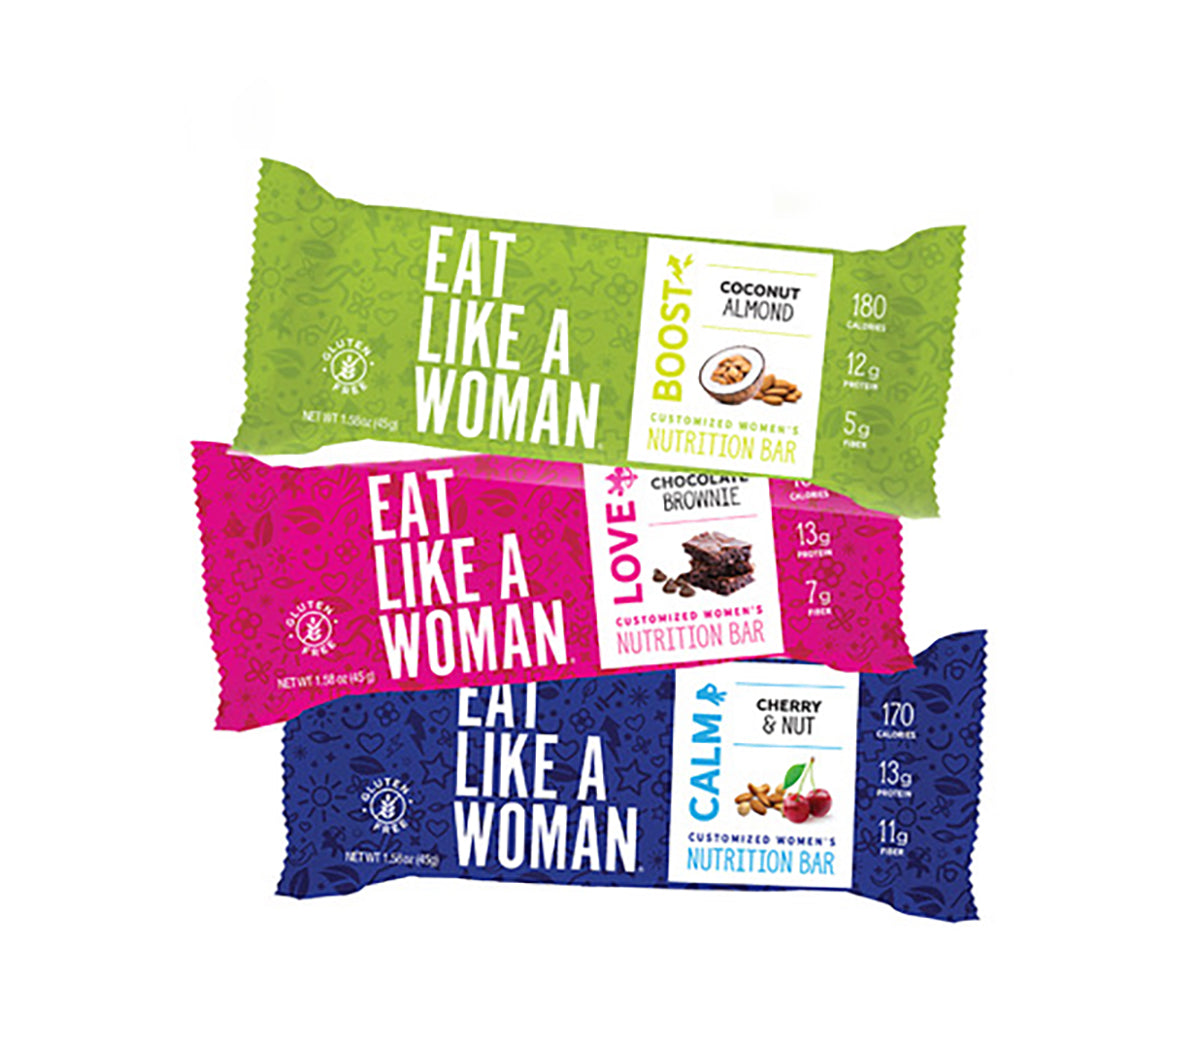 Assorted Flavors 18-pack: 3 Delicious Flavors! Chocolate Brownie, Coconut Almond & Cherry Nut